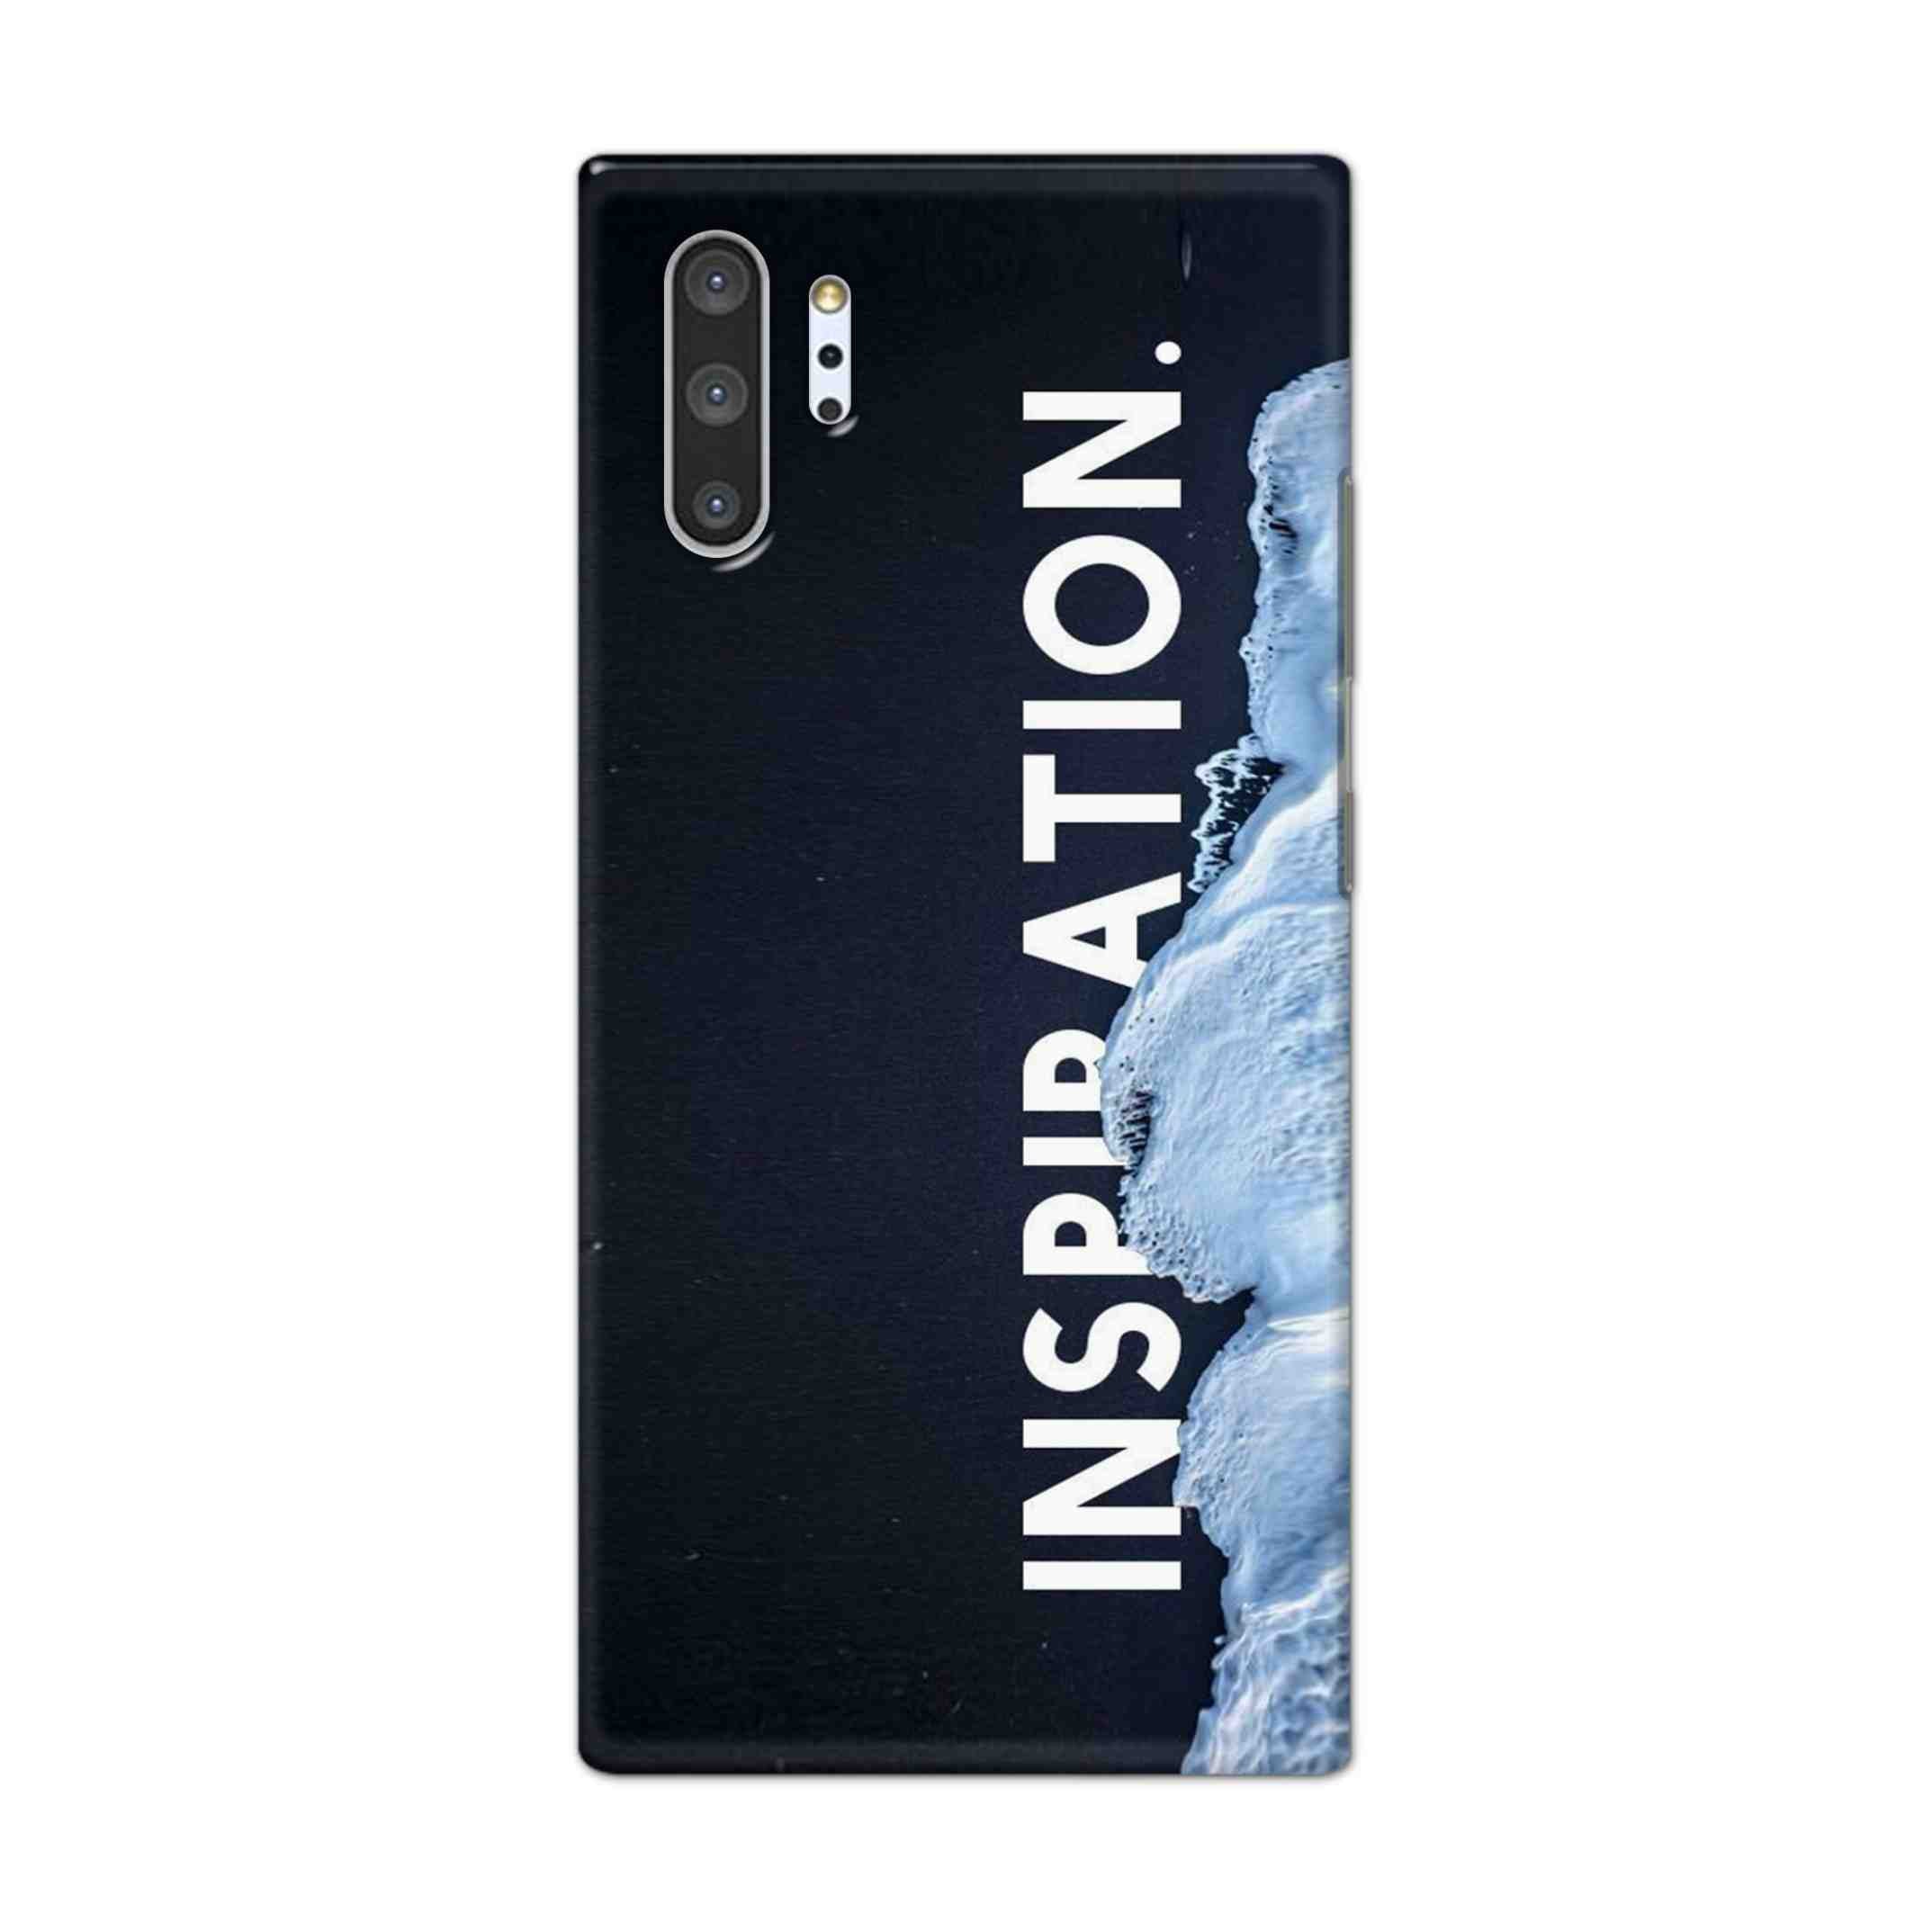 Buy Inspiration Hard Back Mobile Phone Case Cover For Samsung Galaxy Note 10 Pro Online